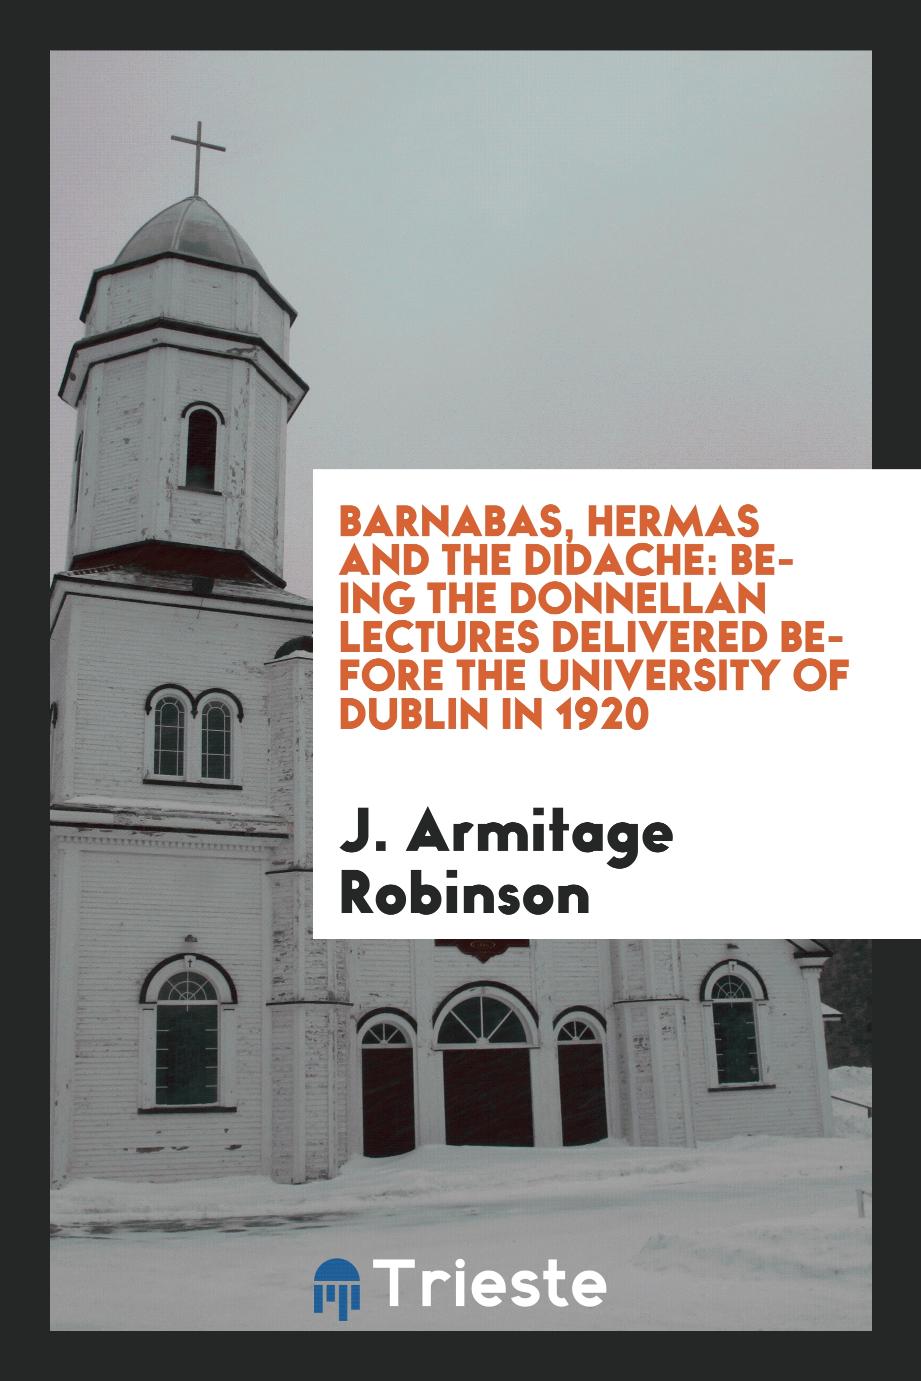 Barnabas, Hermas and the Didache: being the Donnellan lectures delivered before the University of Dublin in 1920